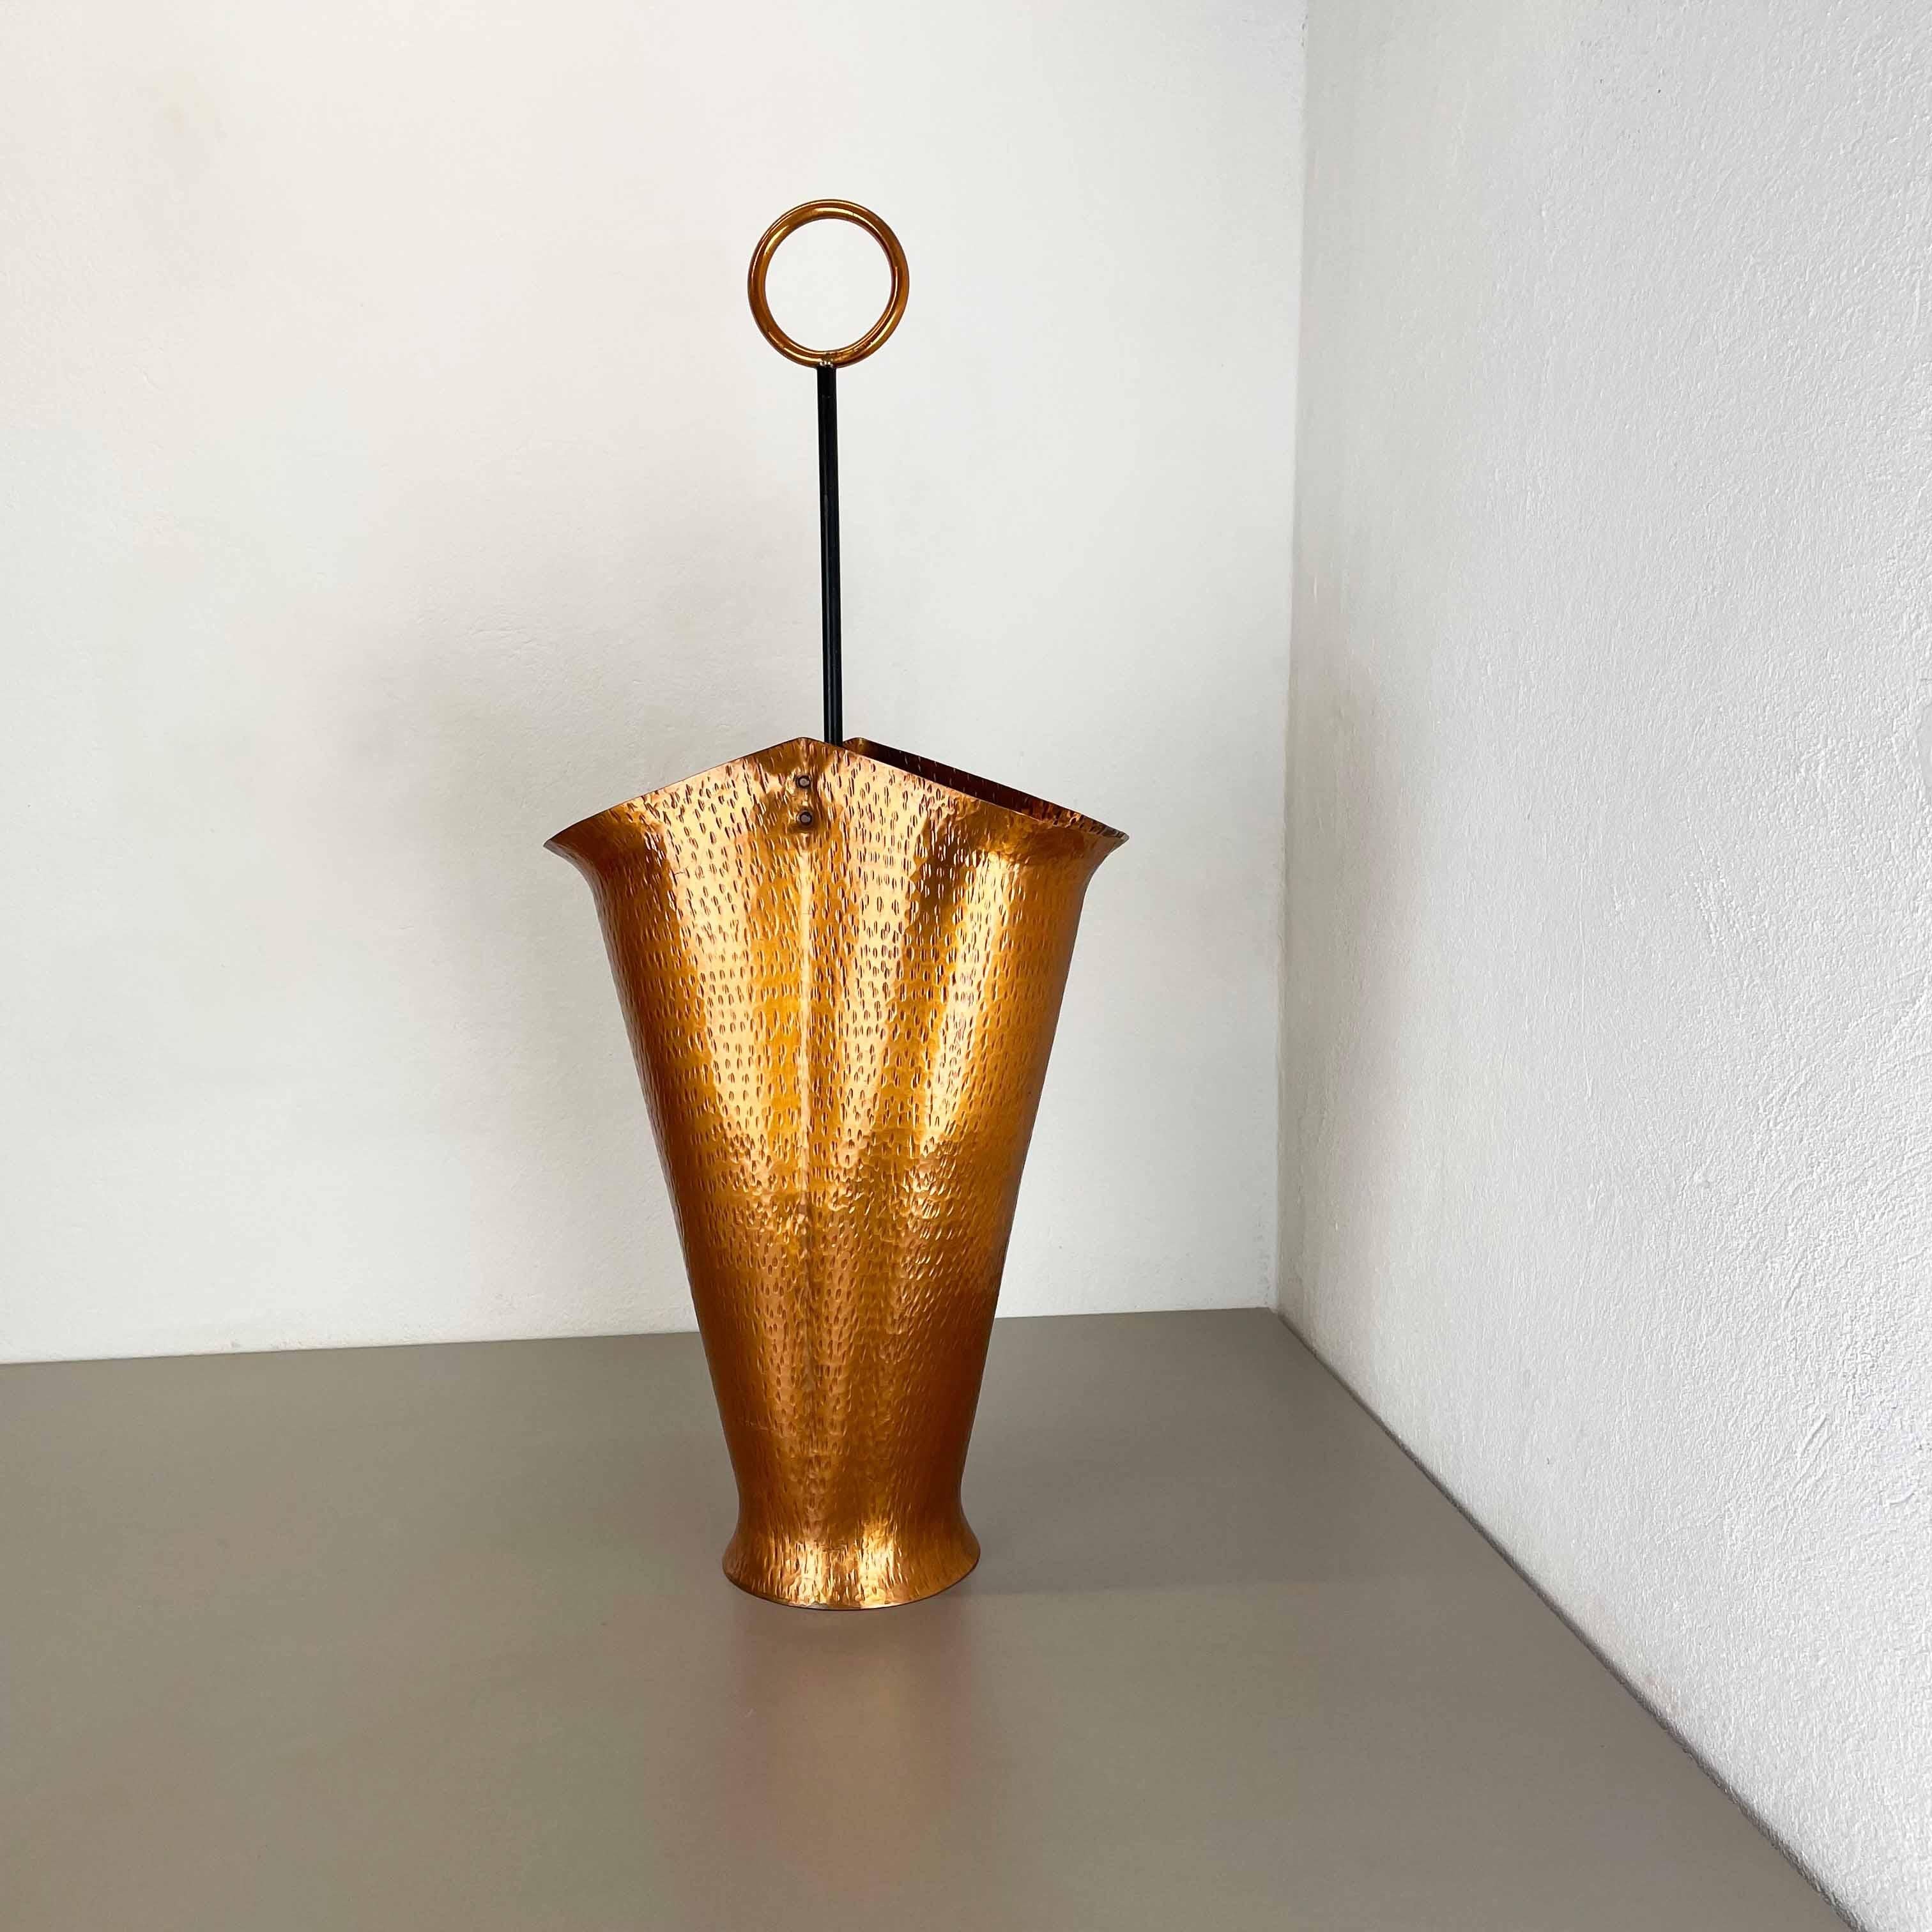 Article:

hollywood regency umbrella stand


Origin:

Germany


Age:

1970s


Producer:

marked with AWD, Germany


This original vintage Hollywood regency style umbrella Stand was produced in the 1970s by AWD Metall in Germany.